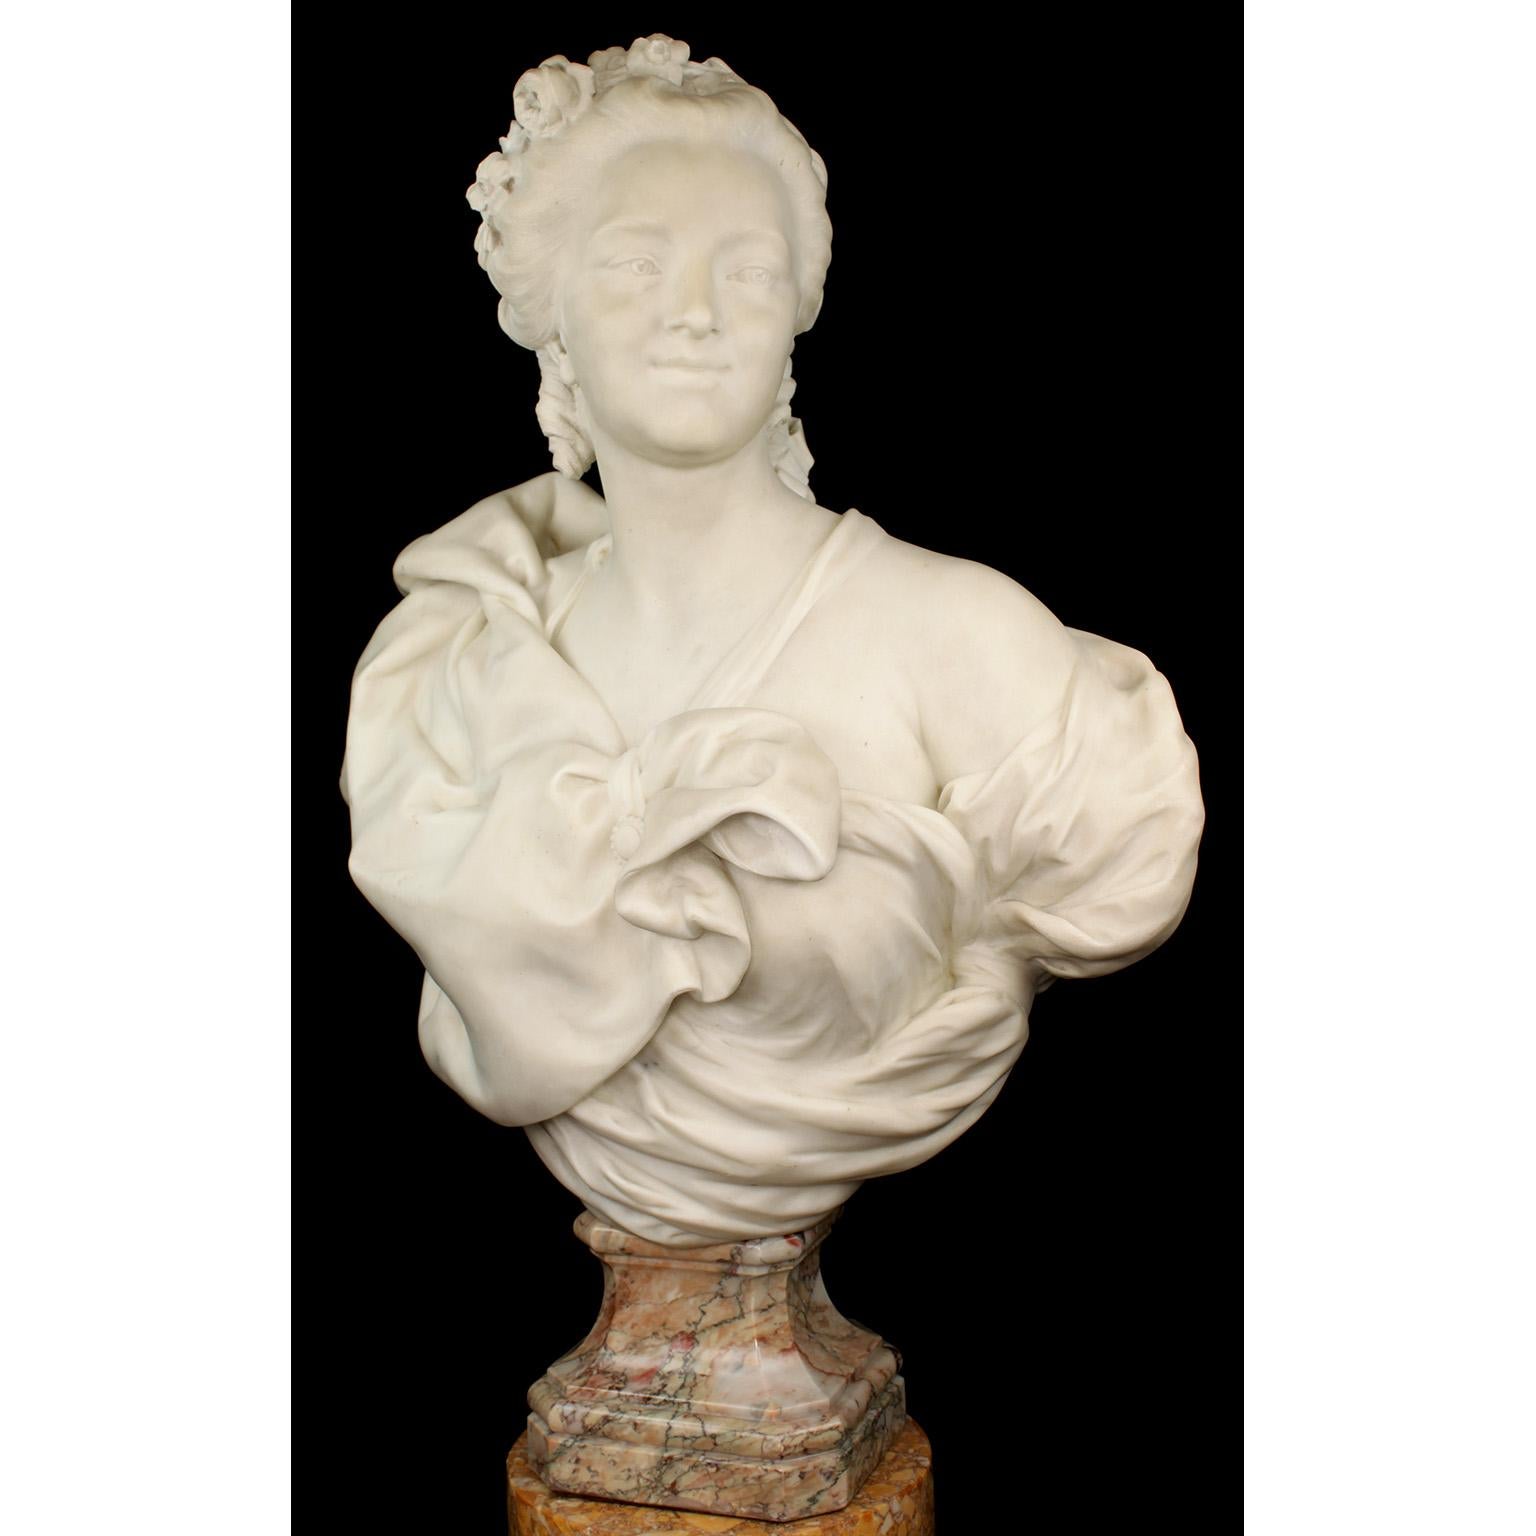 A very fine and large French 19th century white marble bust of a young beauty, purported to be a young 